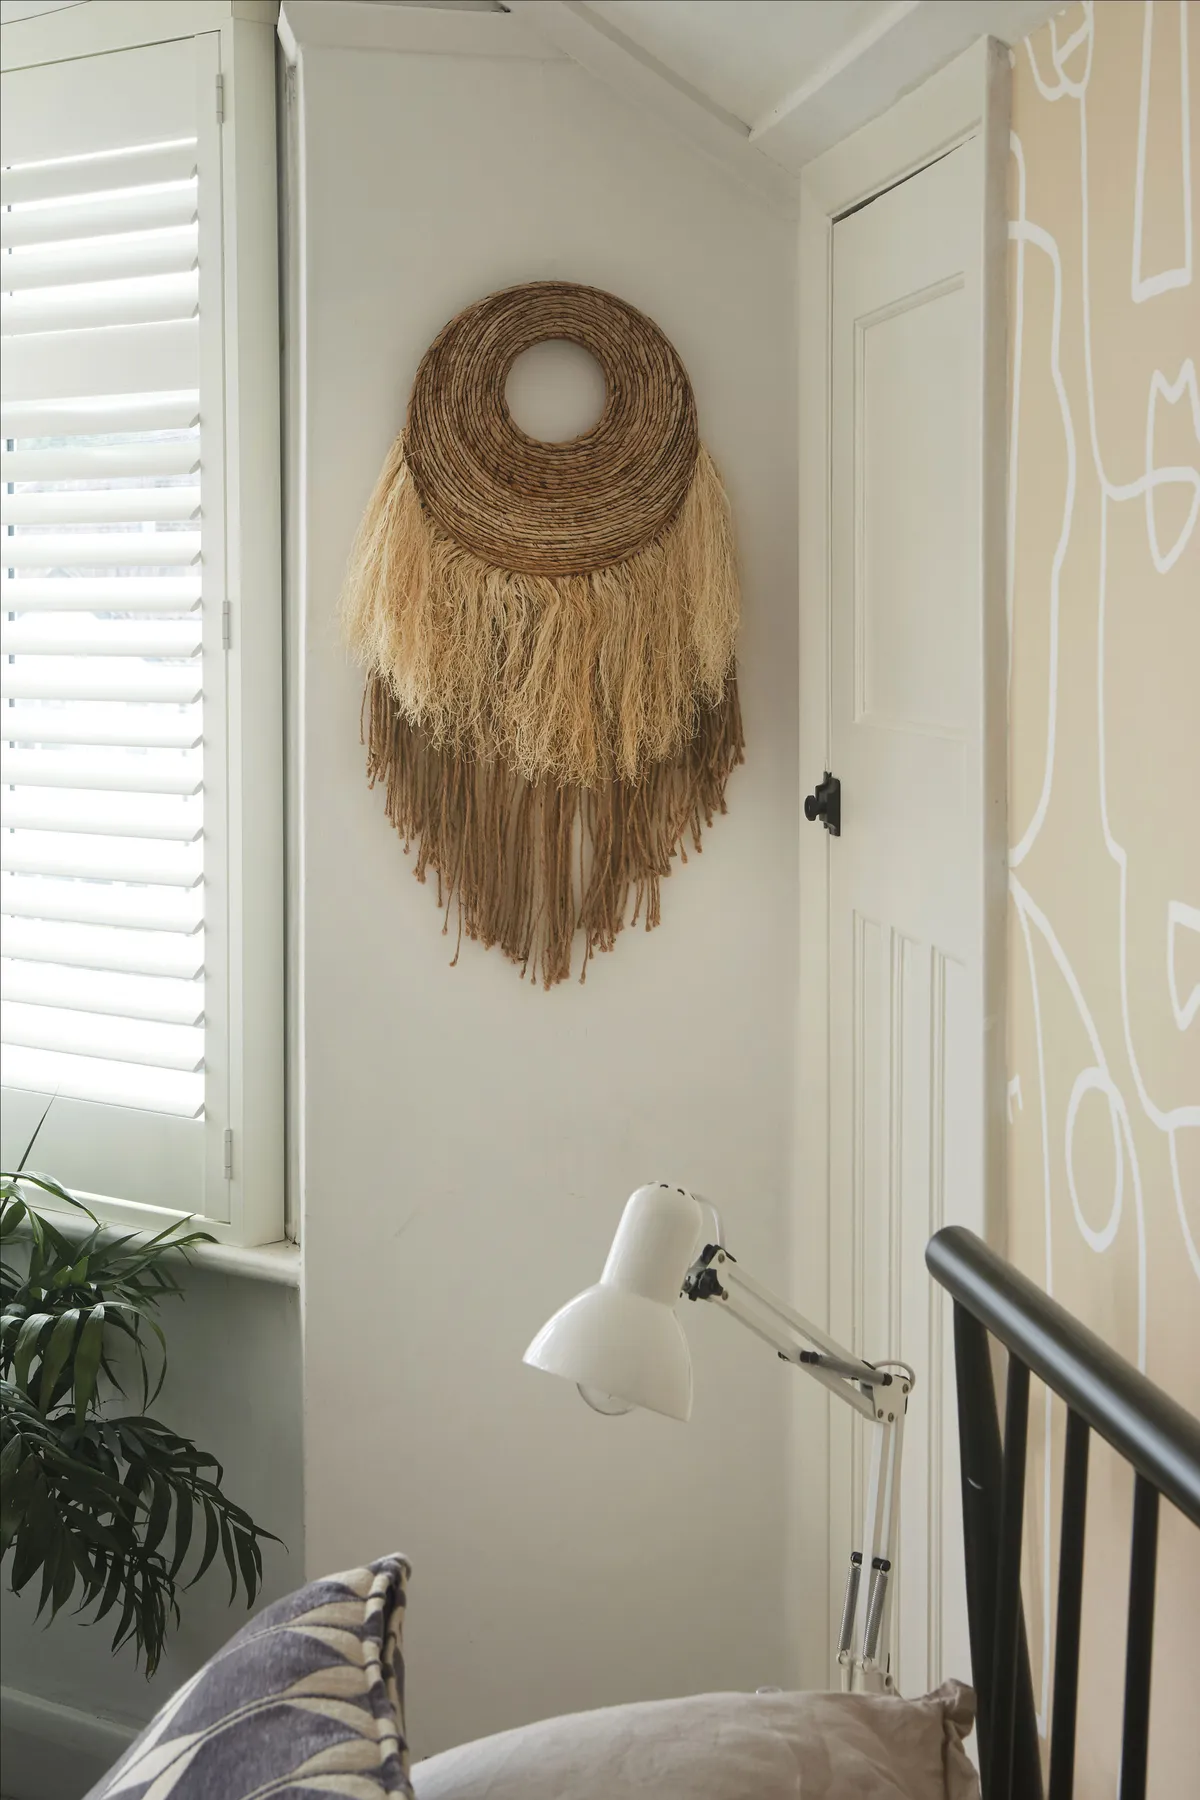 ‘I love So-Cal, boho schemes so you’ll find lots of items with fringing and tassels in this room!’ says Laurie